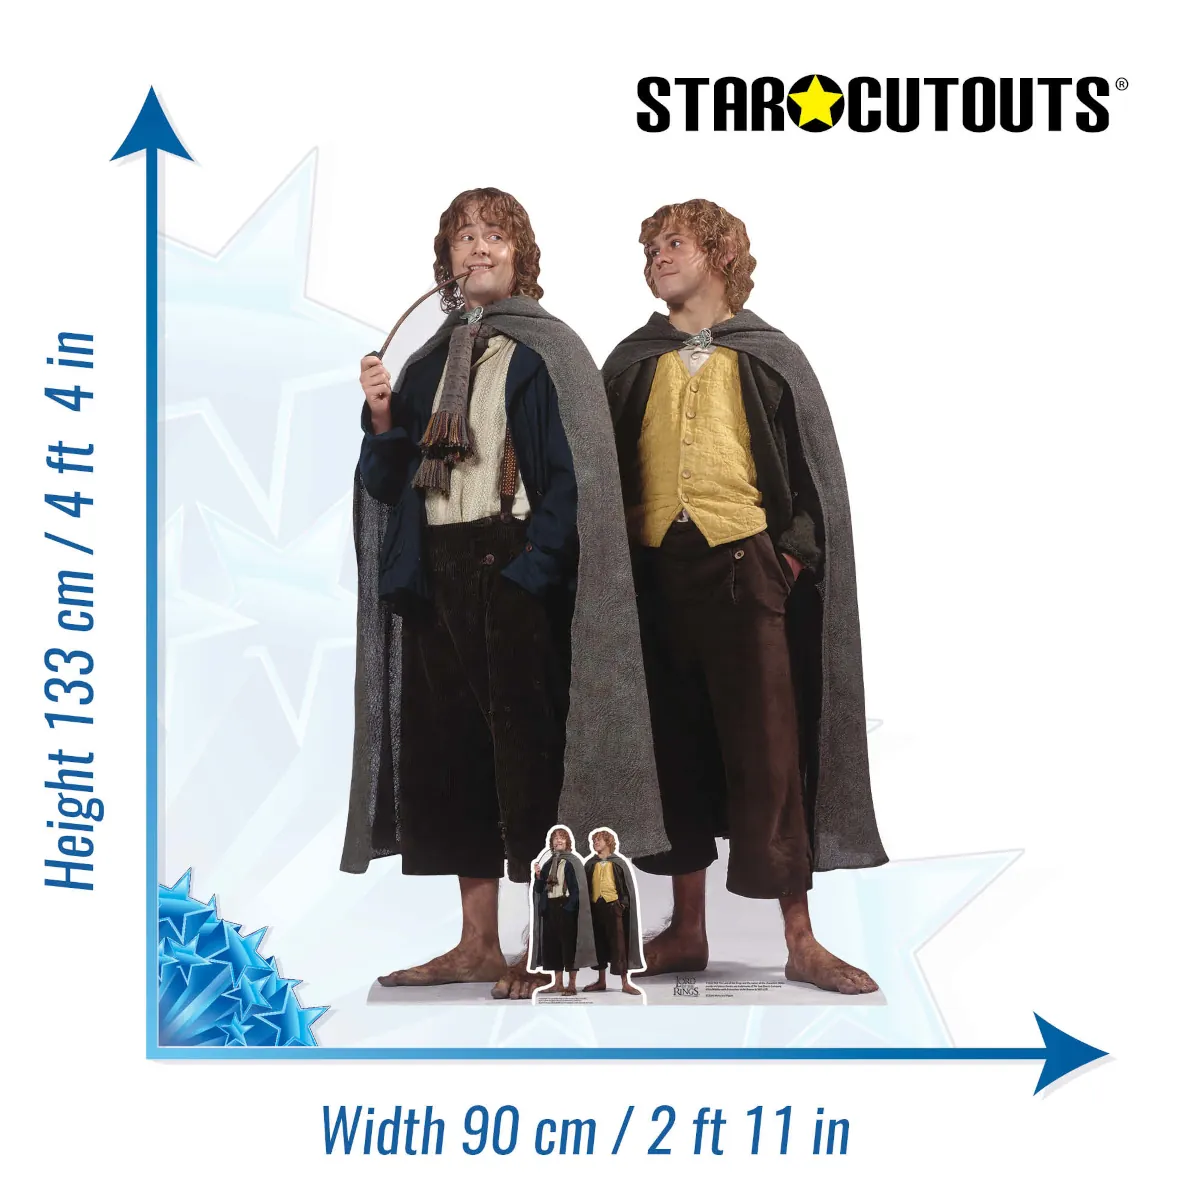 SC4202 Pippin & Merry (The Lord of the Rings) Double Lifesize + Mini Cardboard Cutout Standee Size